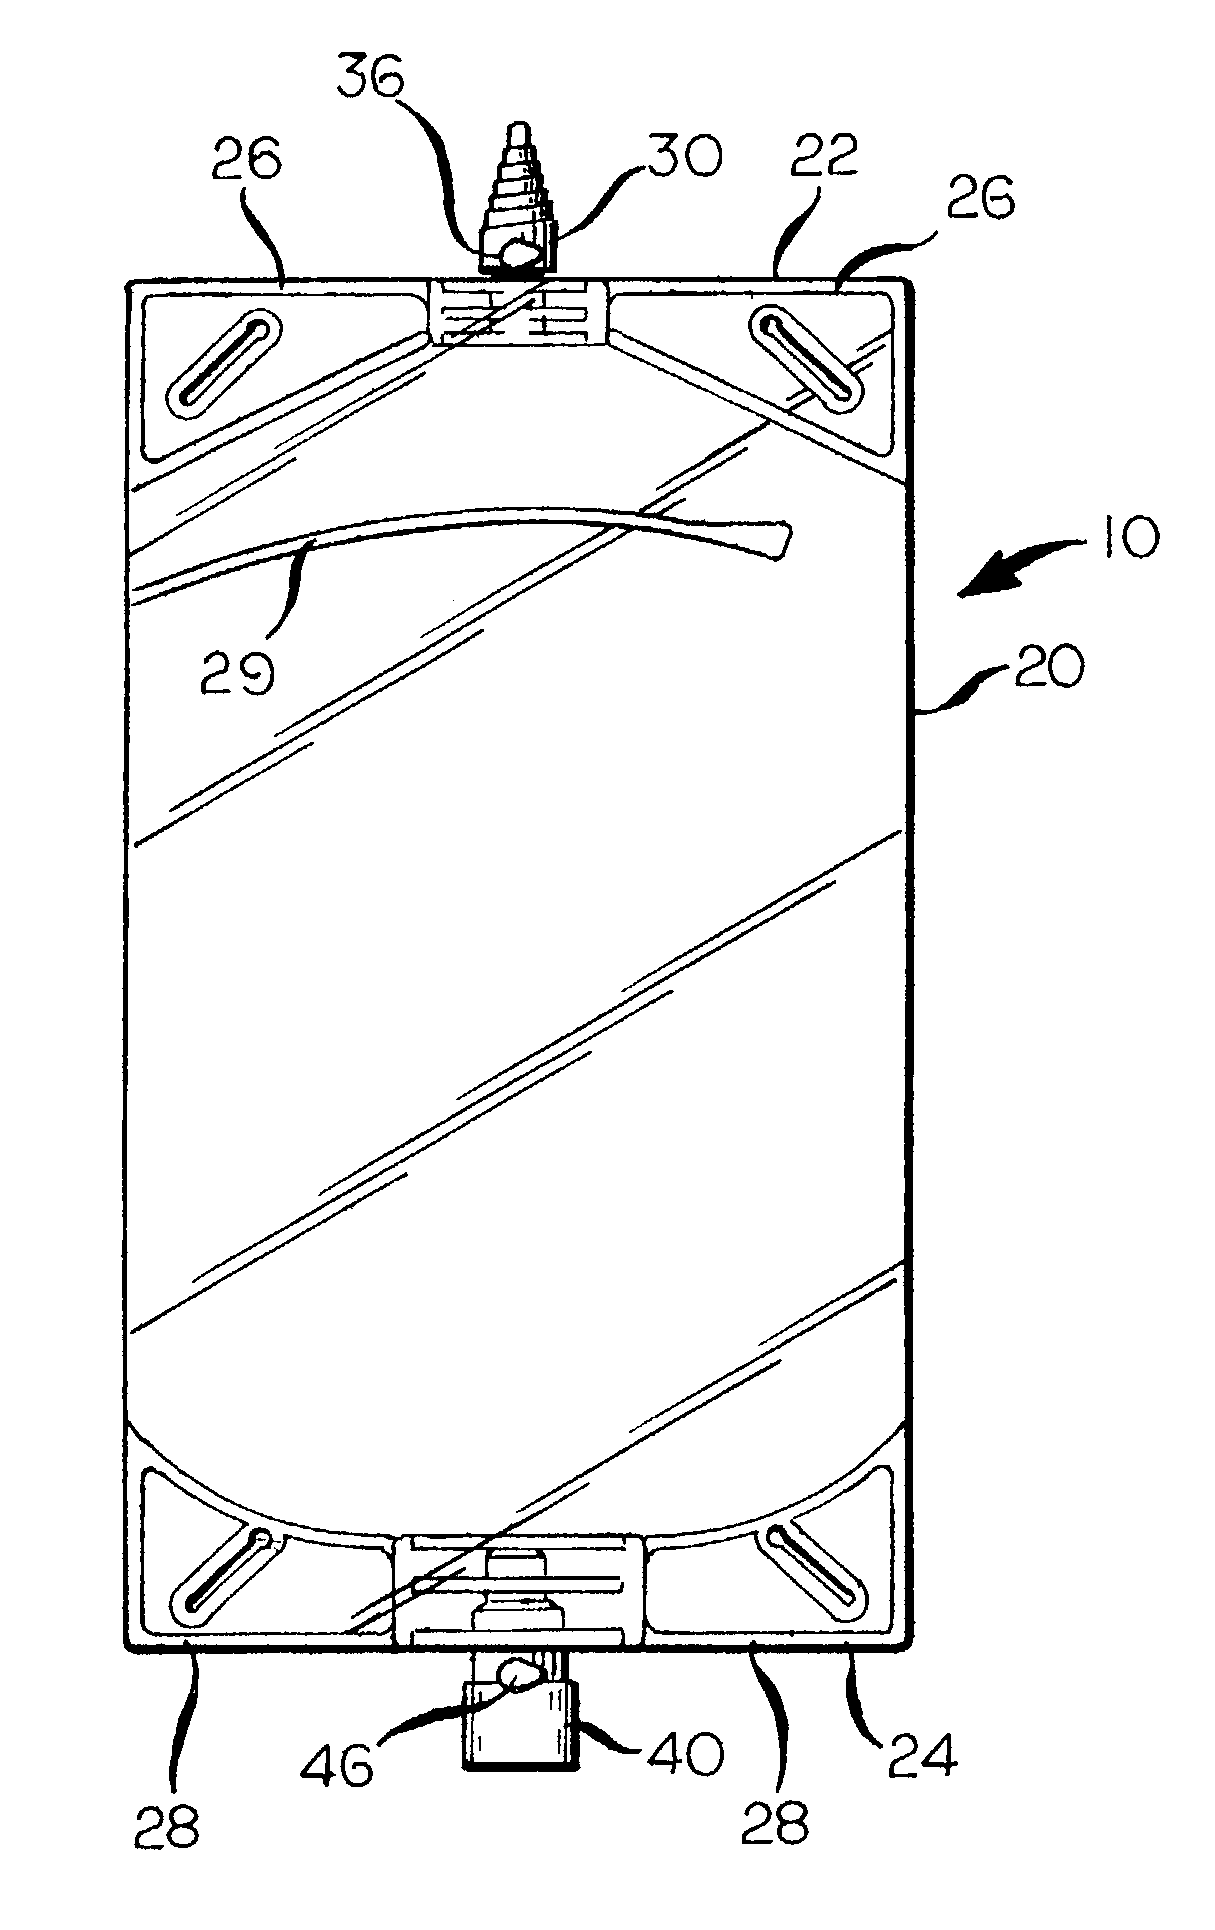 Urine collection method and apparatus